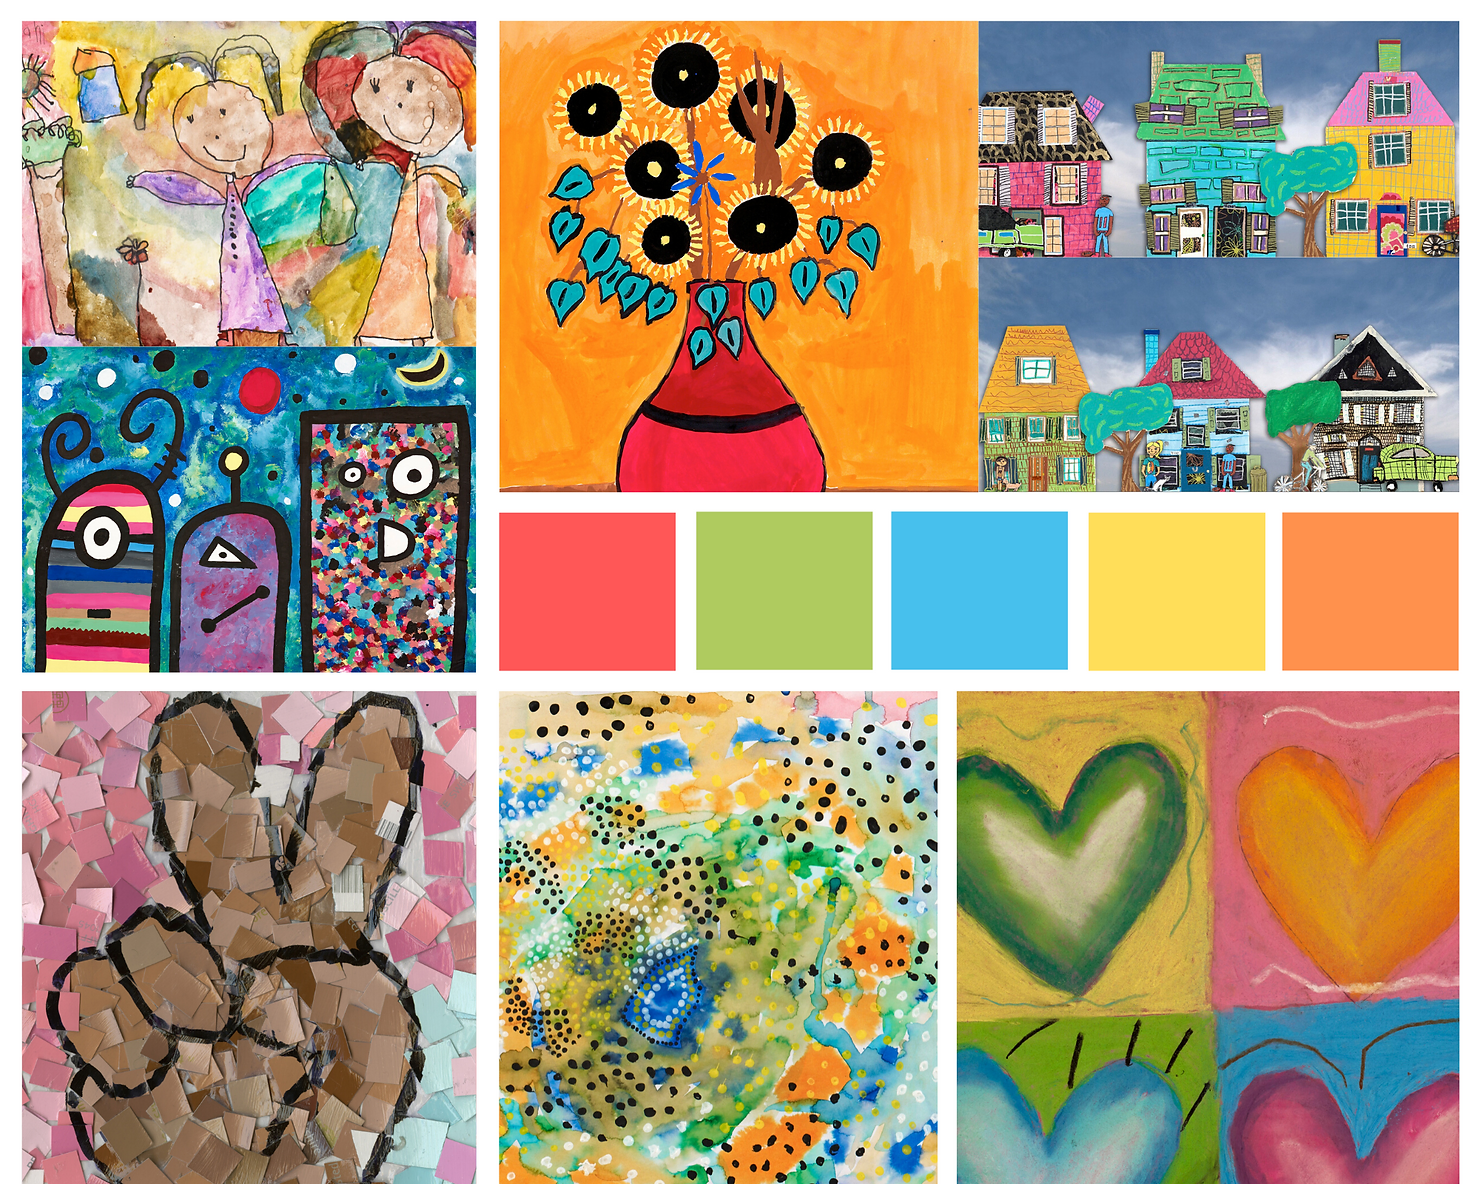 Pediatric Specialty at Danville - Youth Art Collection